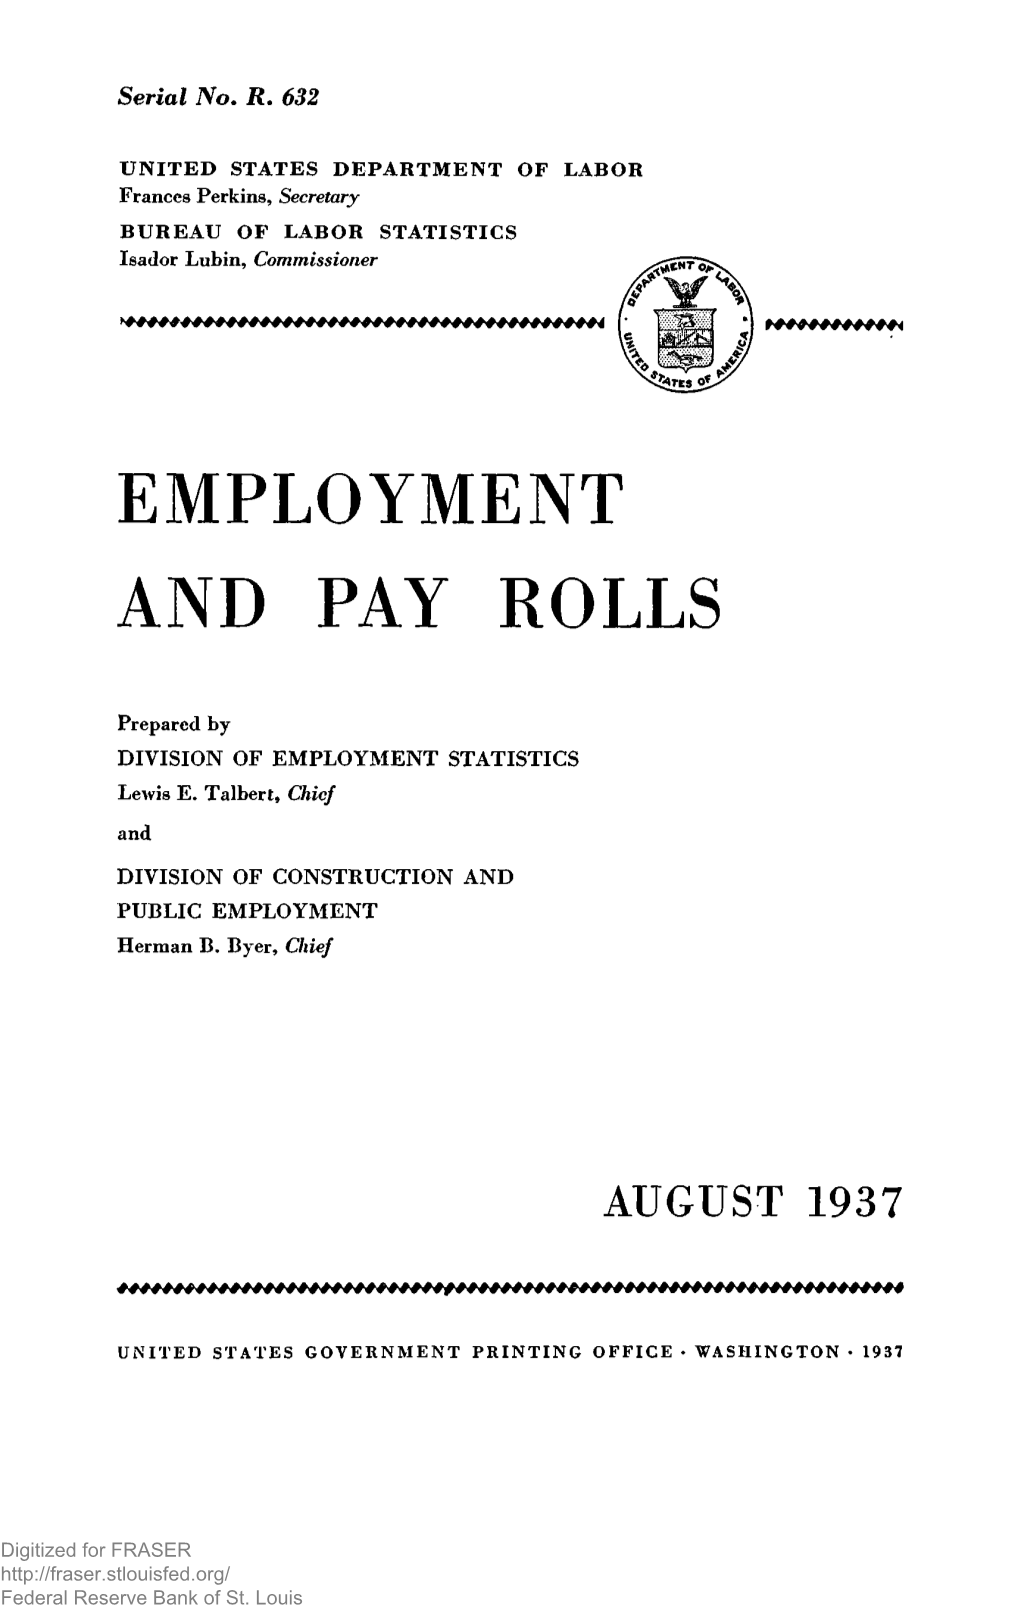 Employment and Pay Rolls August 1937